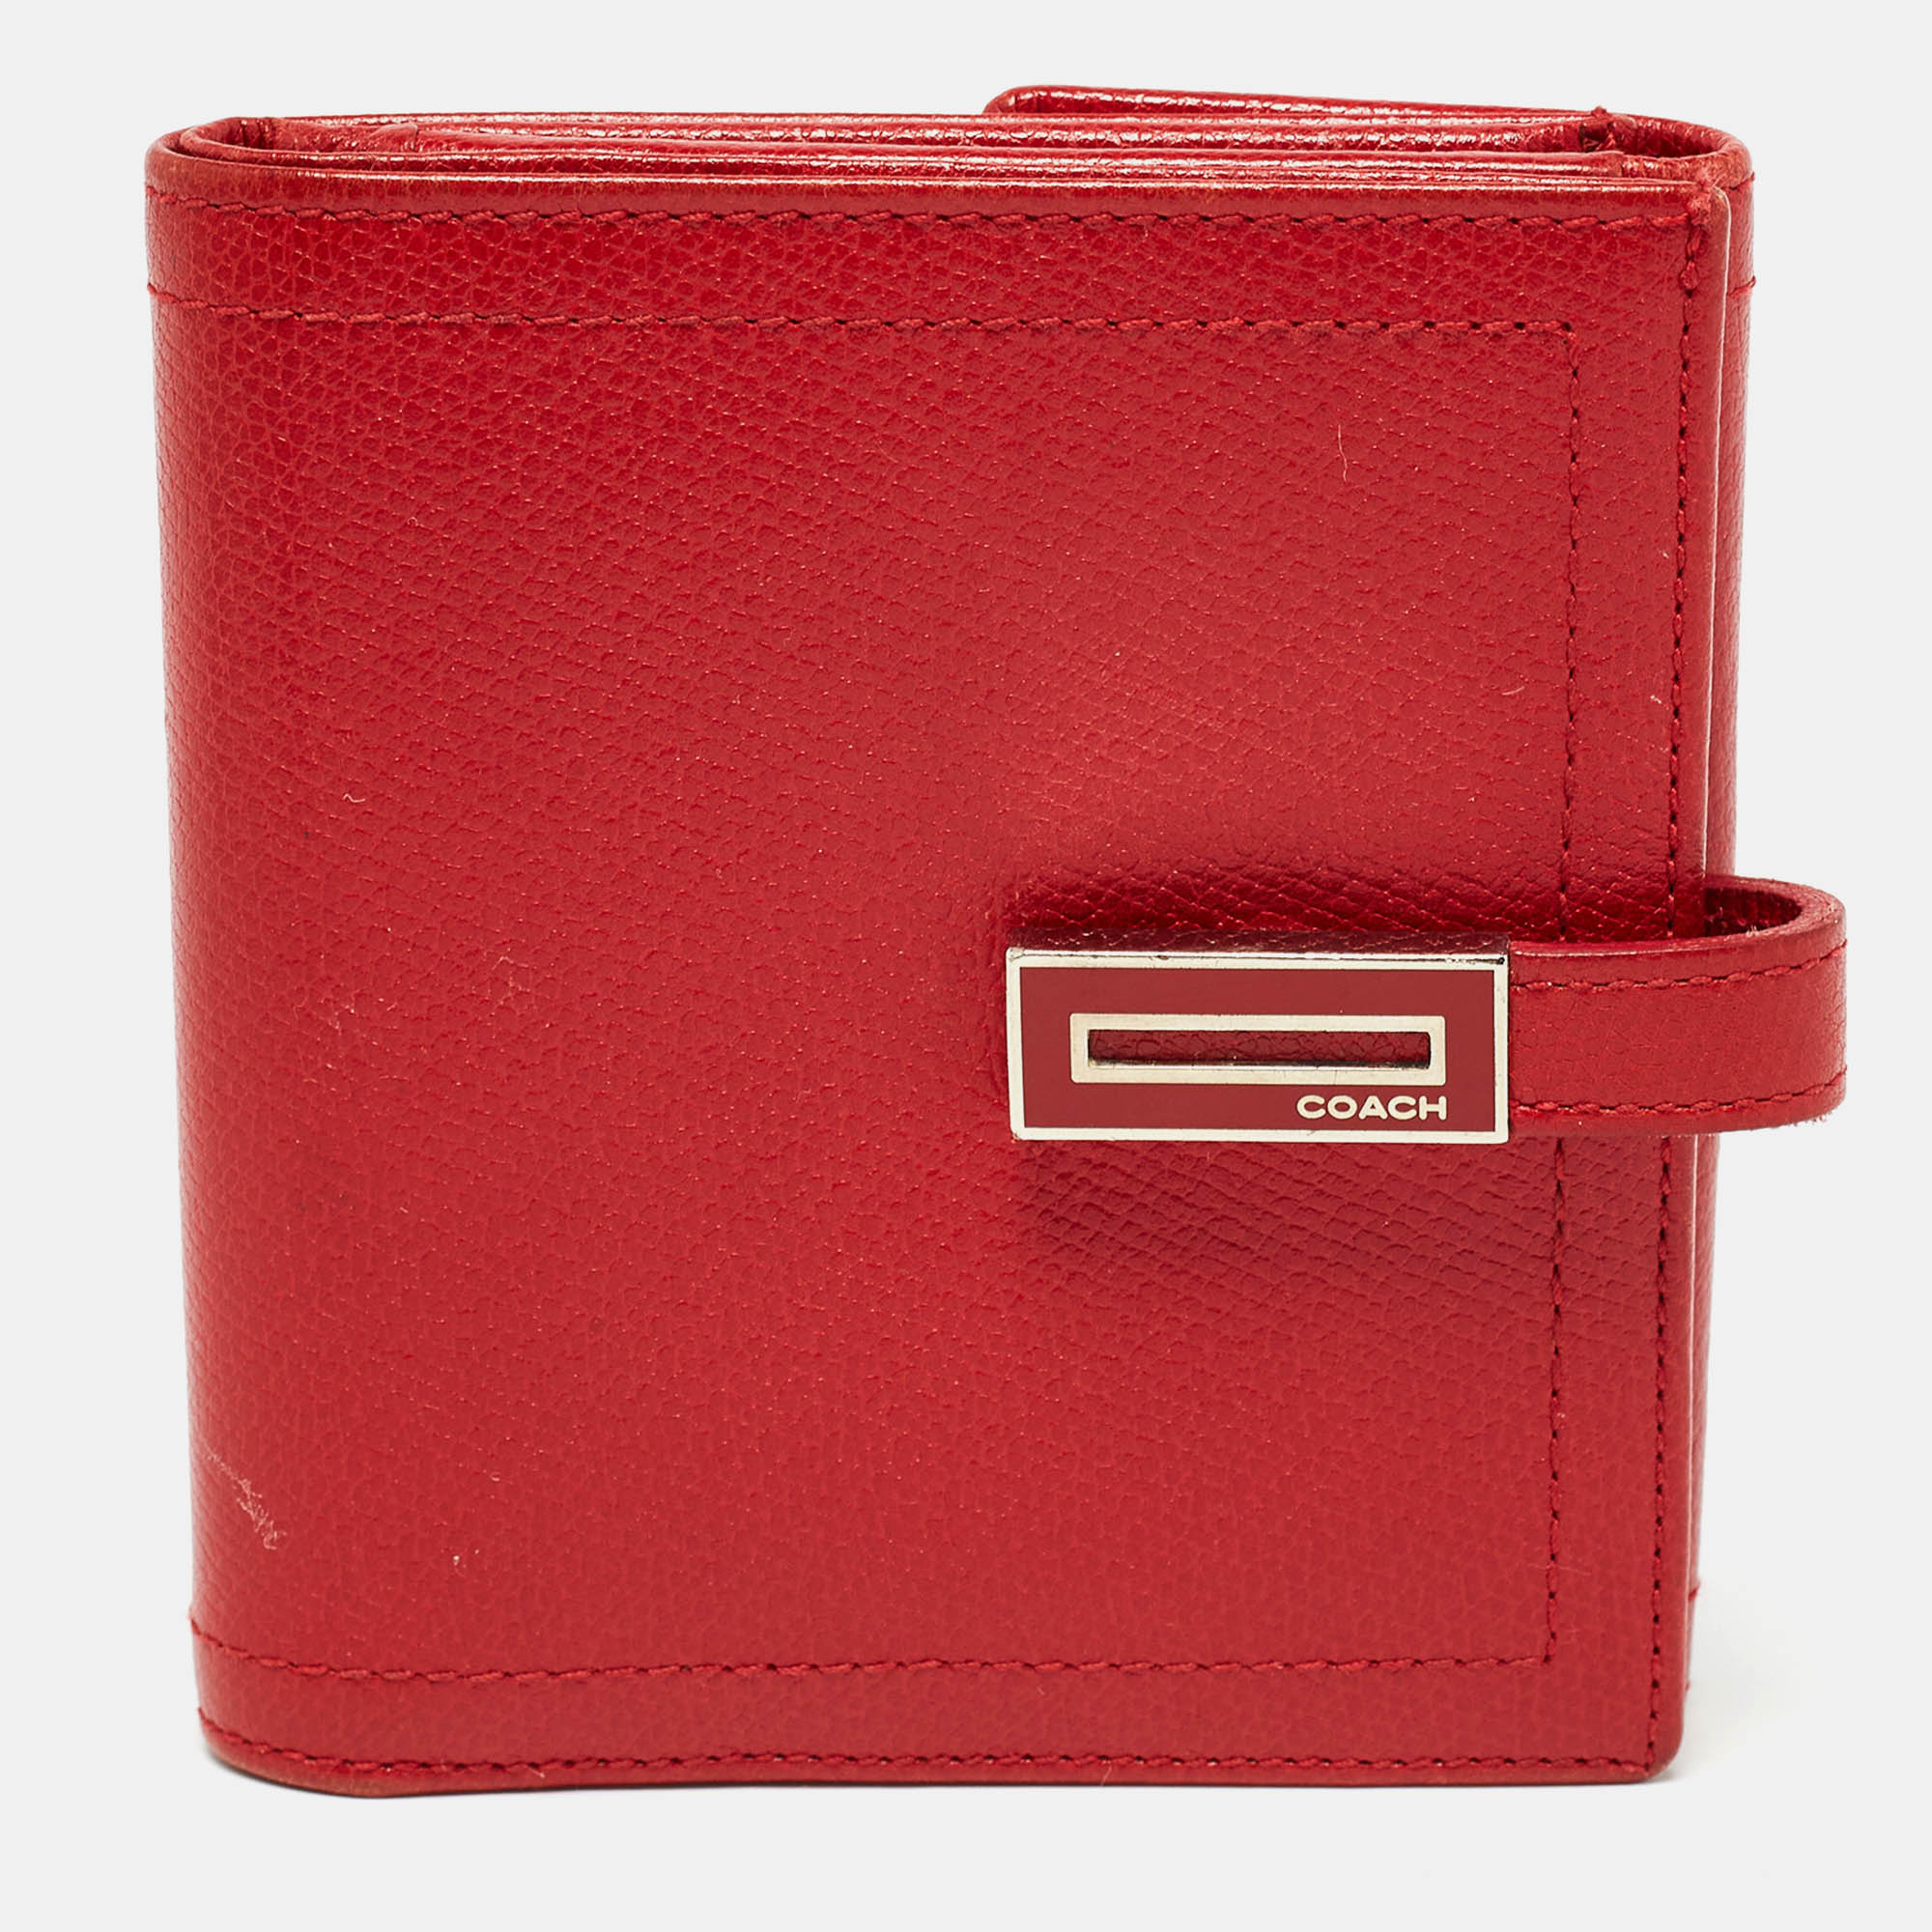 

Coach Red Leather Metal Flap Compact Wallet